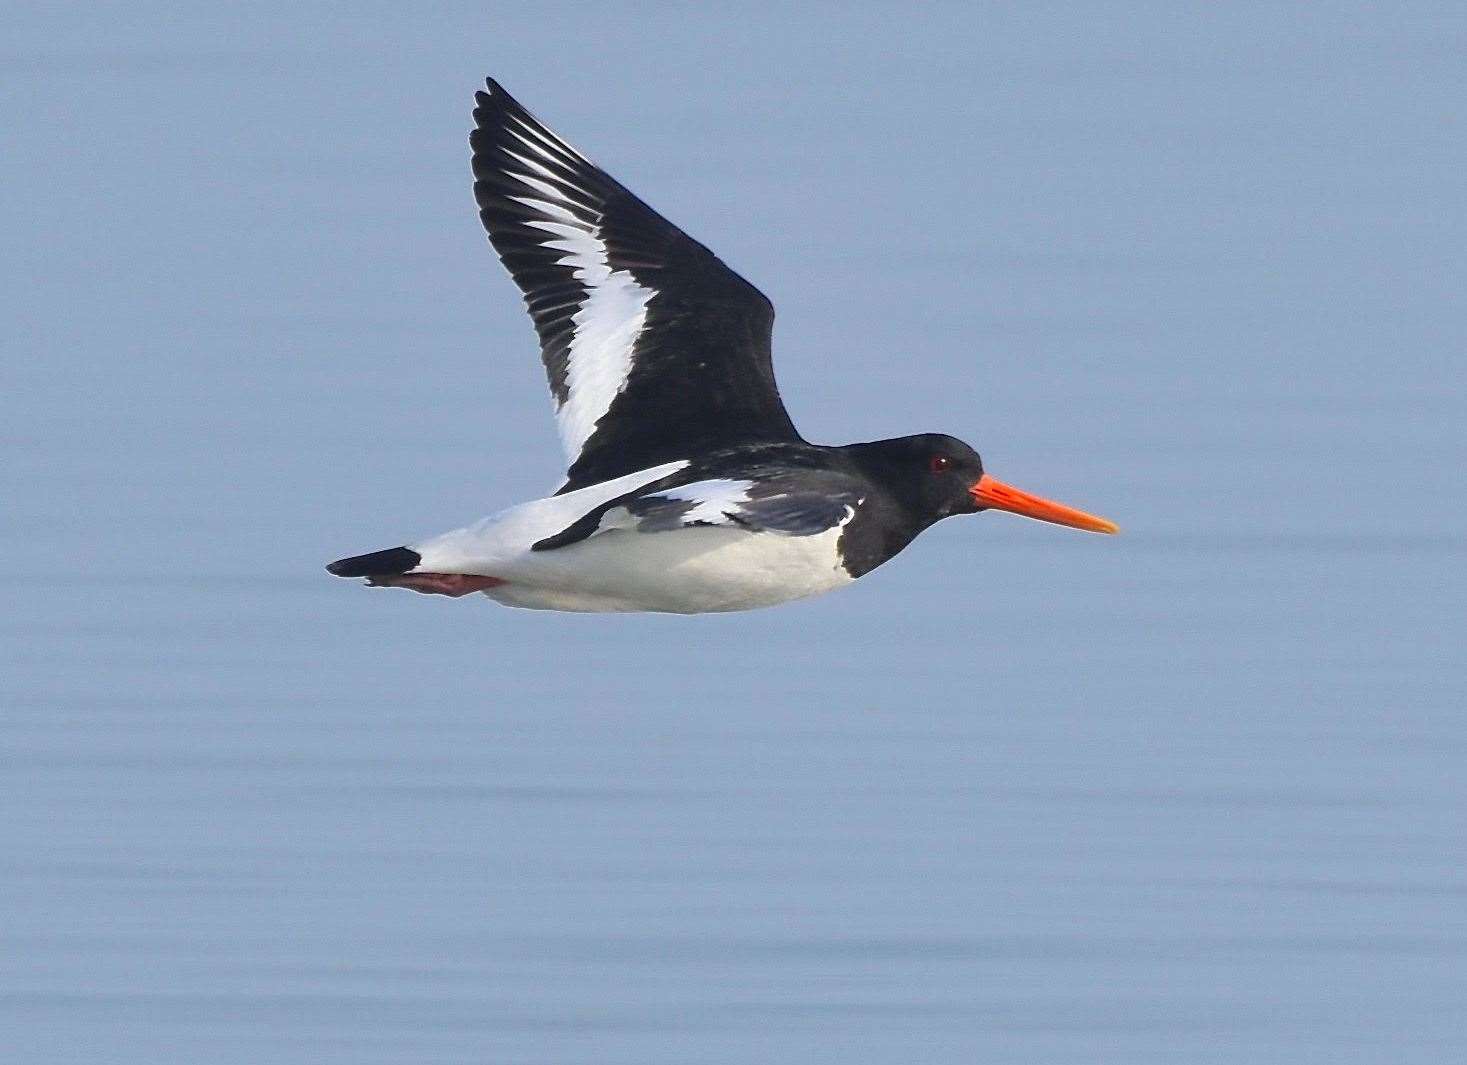 Cllr Ashley Clark says there have been reports of dogs disturbing wildlife. Pictured: An oystercatcher flying over the sea in Whitstable. Picture: Ashley Clark